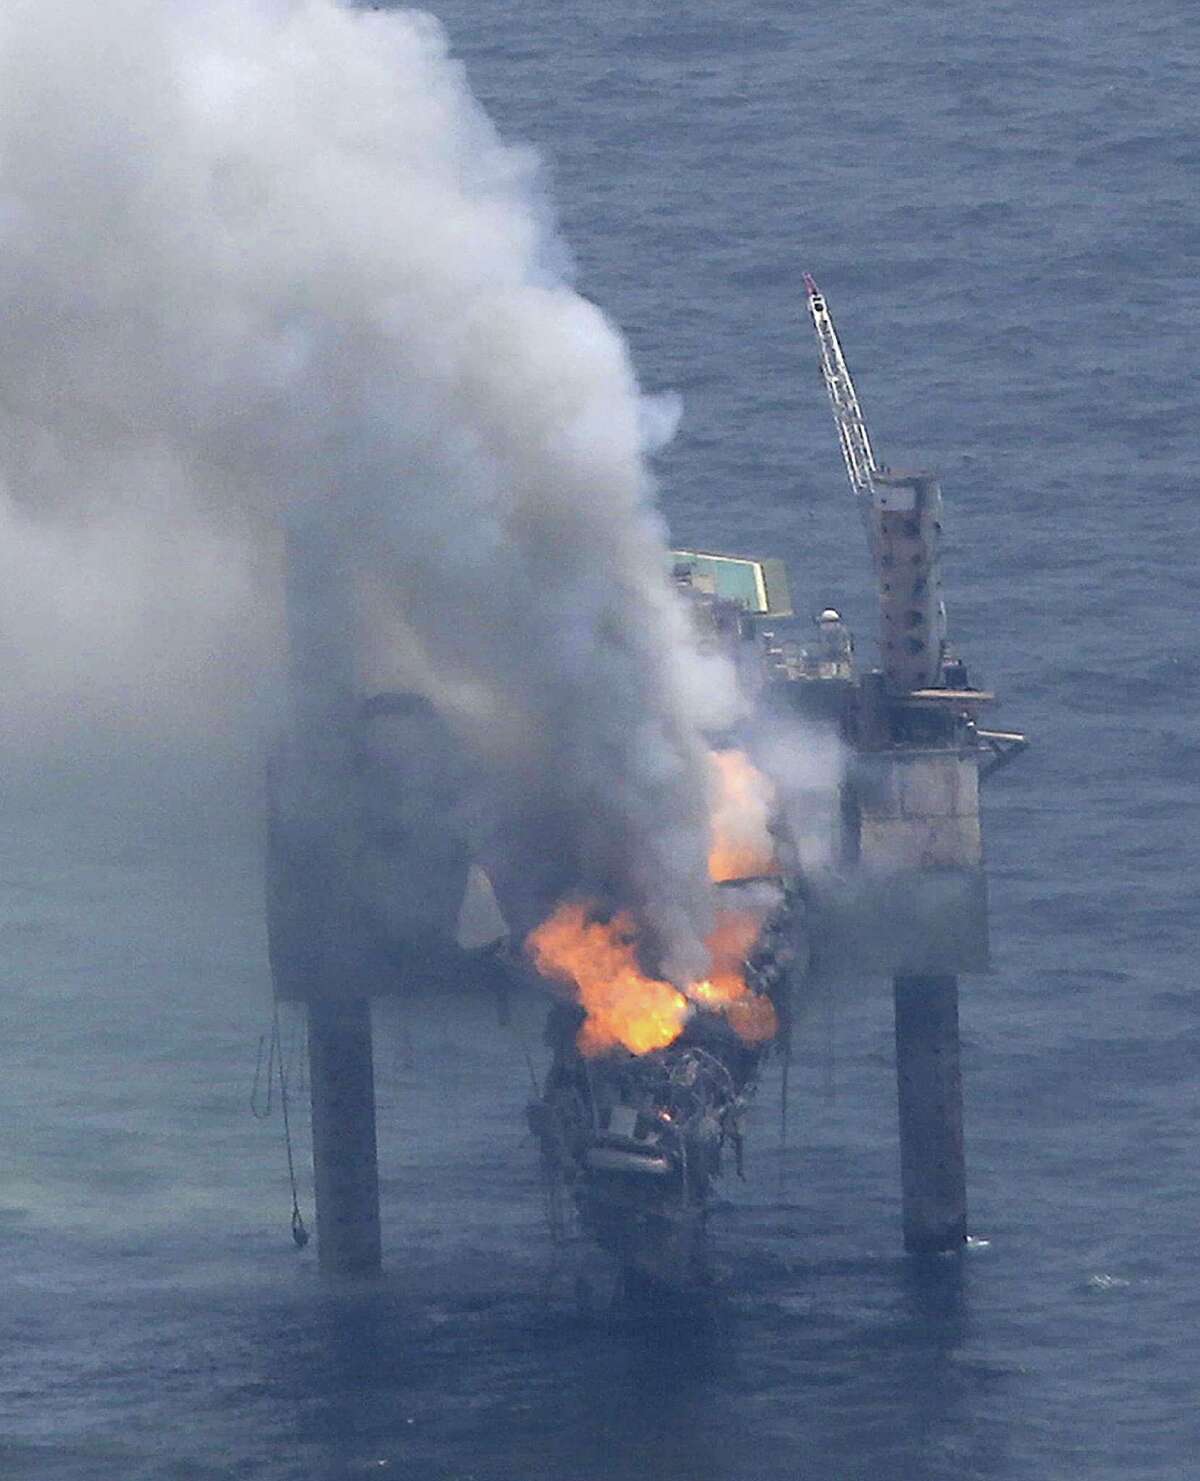 The Hercules 265 drilling rig, located 55 miles off the Louisiana coast in the Gulf of Mexico, caught on fire Tuesday. The rig was drilling a well when gas started flowing out of control, forcing the evacuation of 44 workers. No injuries were reported.